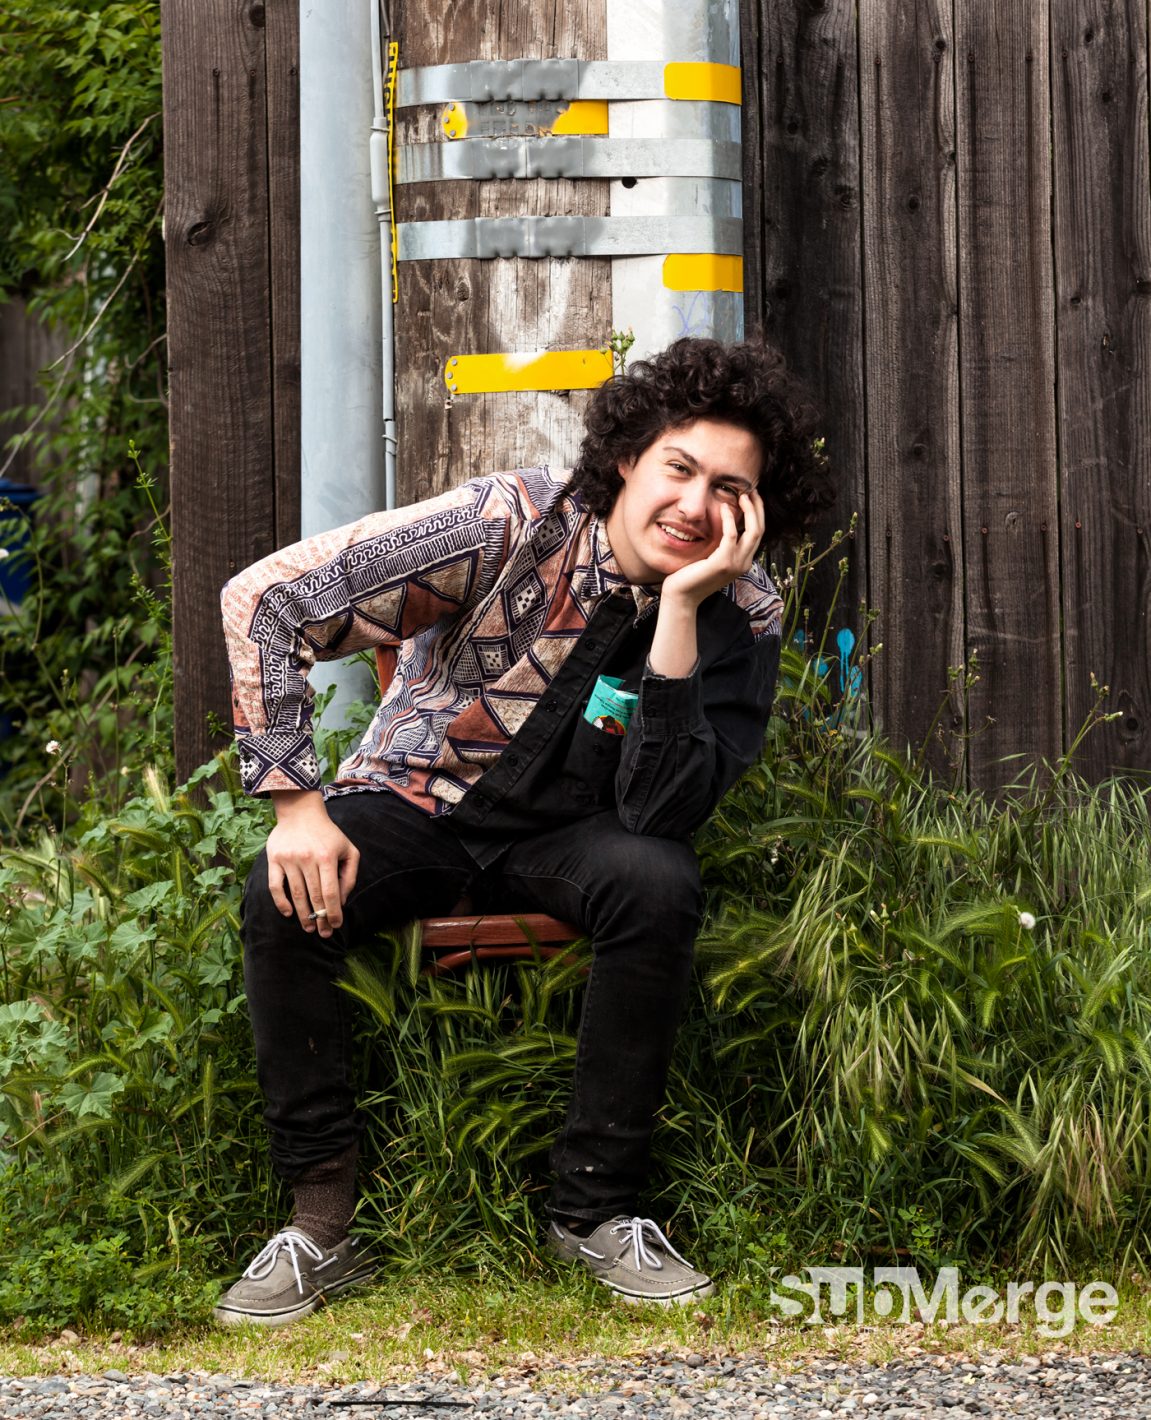 Without a Net • Hobo Johnson Is a Rising HipHop Star … As You’re